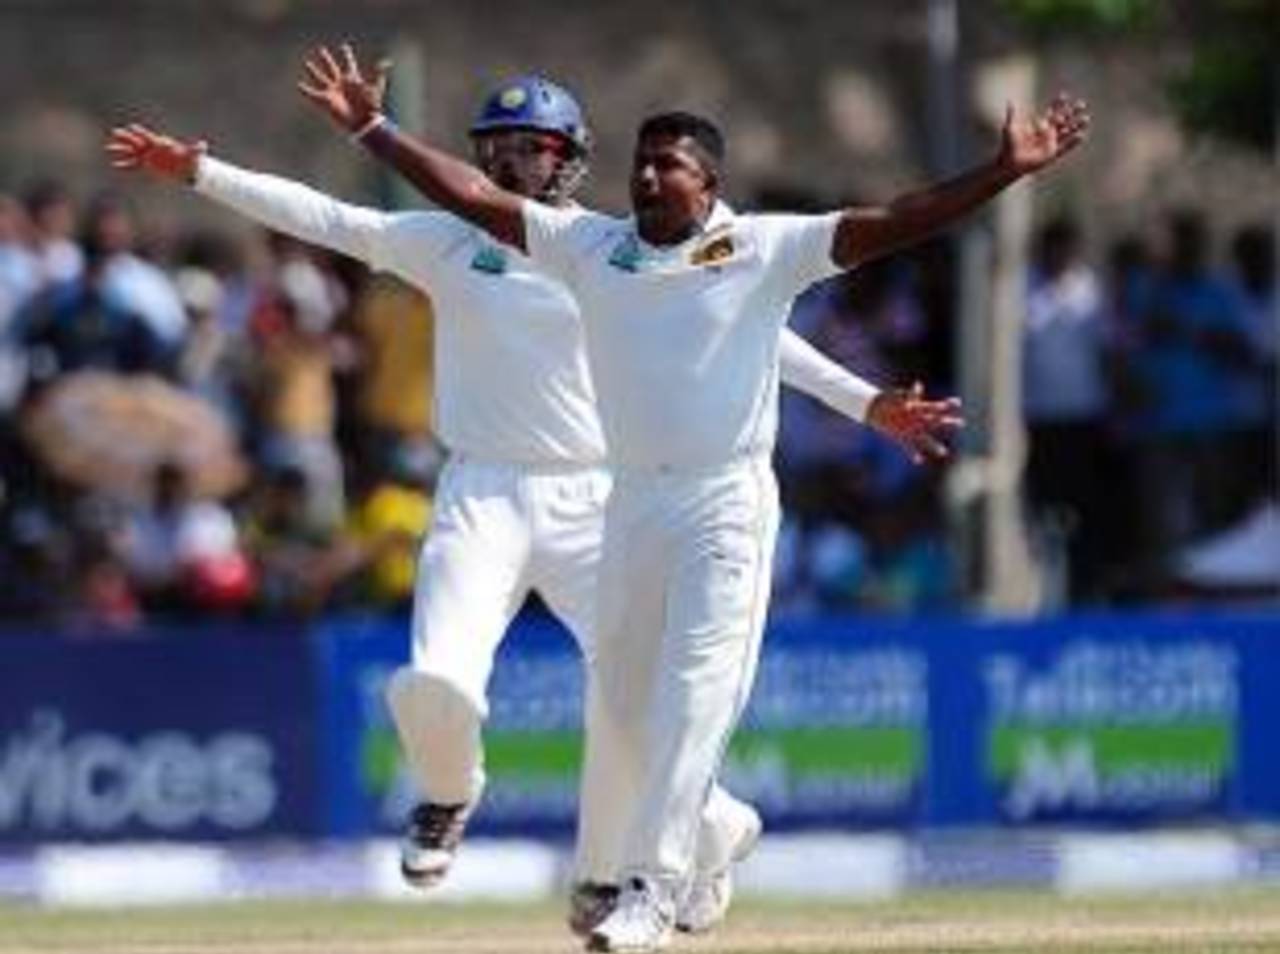 Rangana Herath dismissed the England openers, Sri Lanka v England, 1st Test, Galle, 3rd day, March 28, 2012